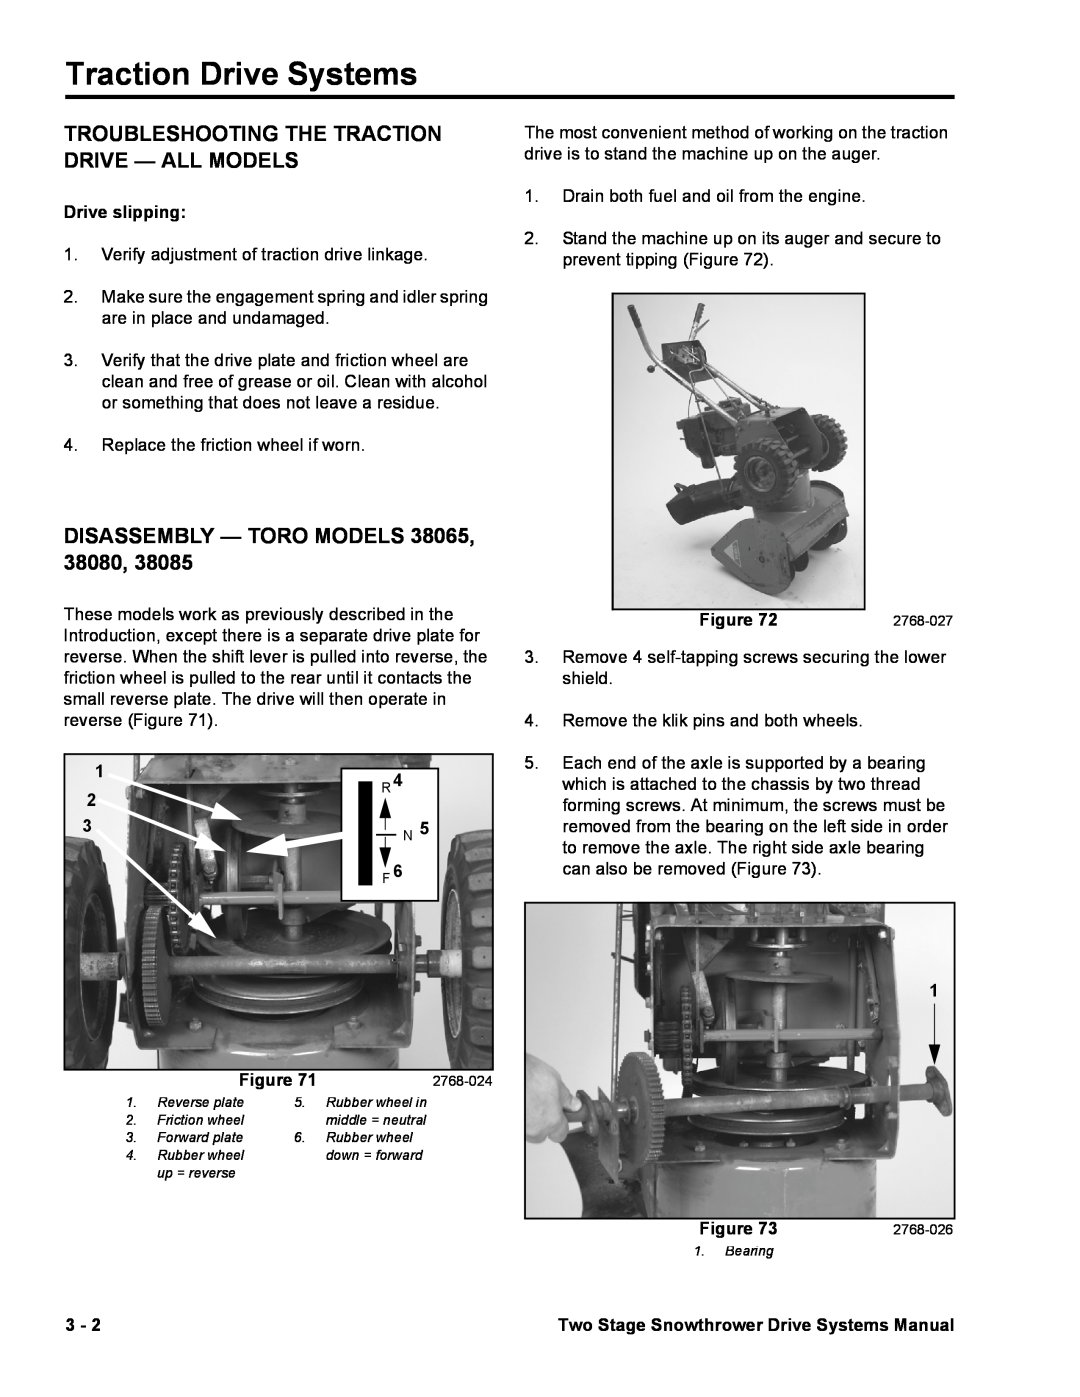 Toro Traction Drive Systems, Troubleshooting The Traction Drive - All Models, DISASSEMBLY - TORO MODELS 38065, 38080 